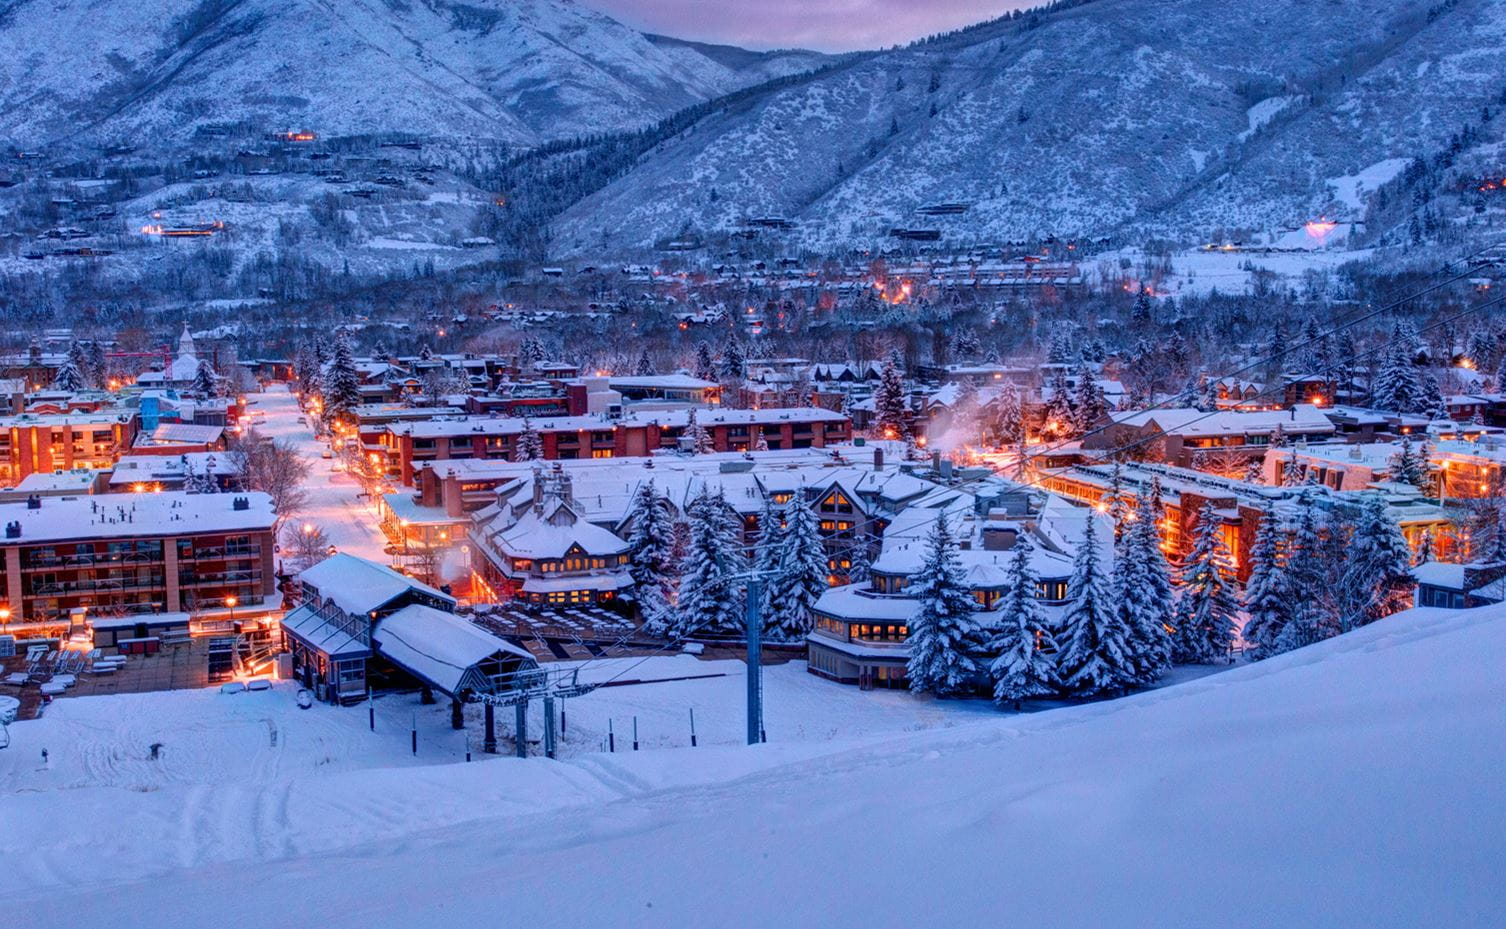 View of the town of Aspen at dusk